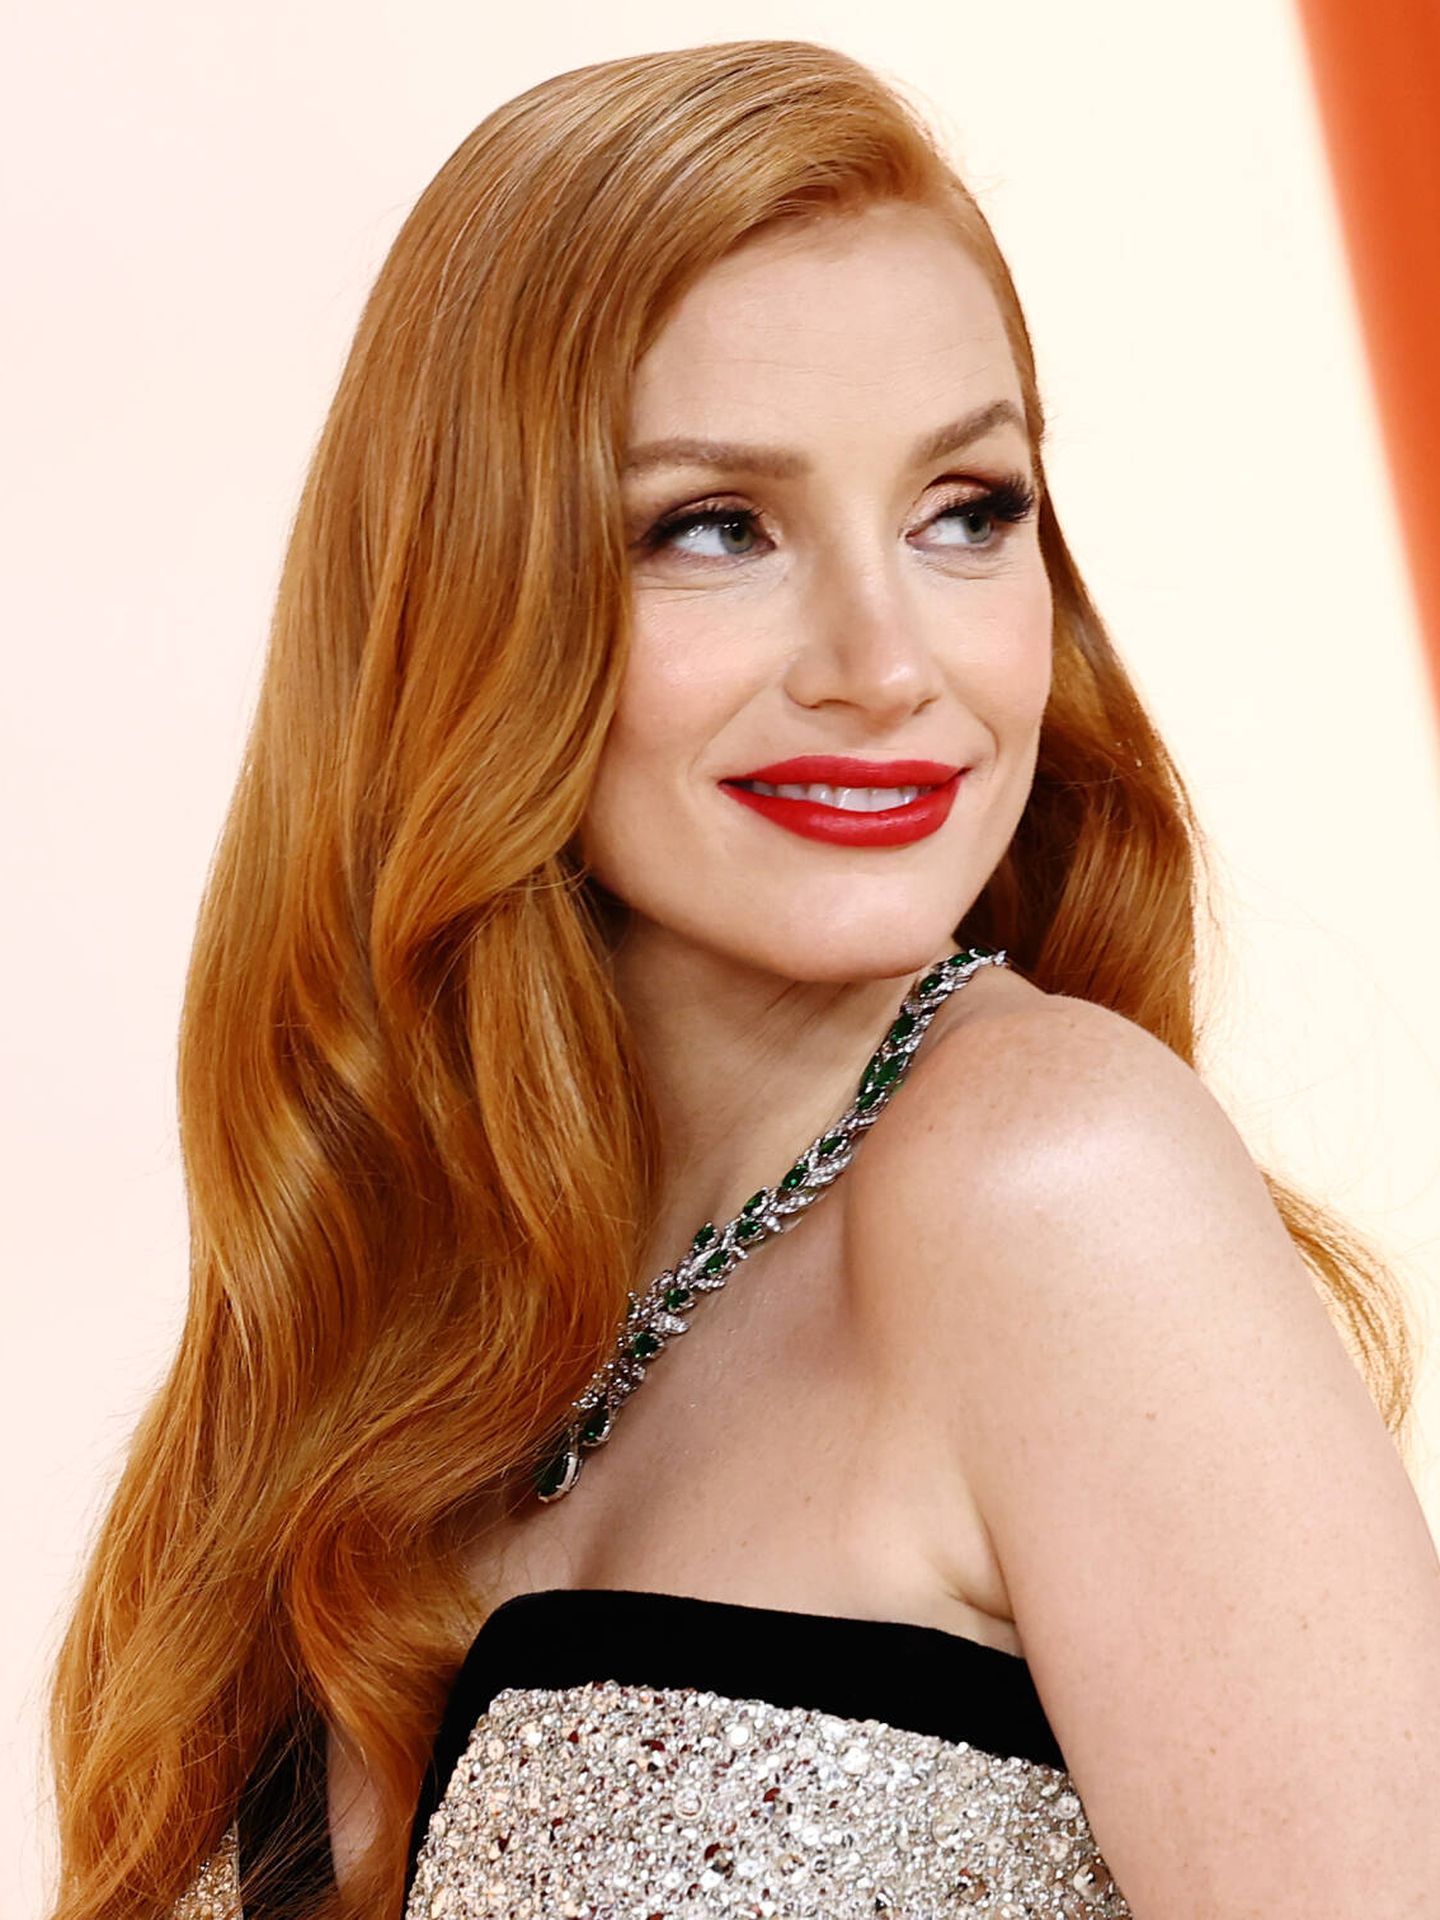 Jessica Chastain, old Hollywood. (Getty/Arturo Holmes)